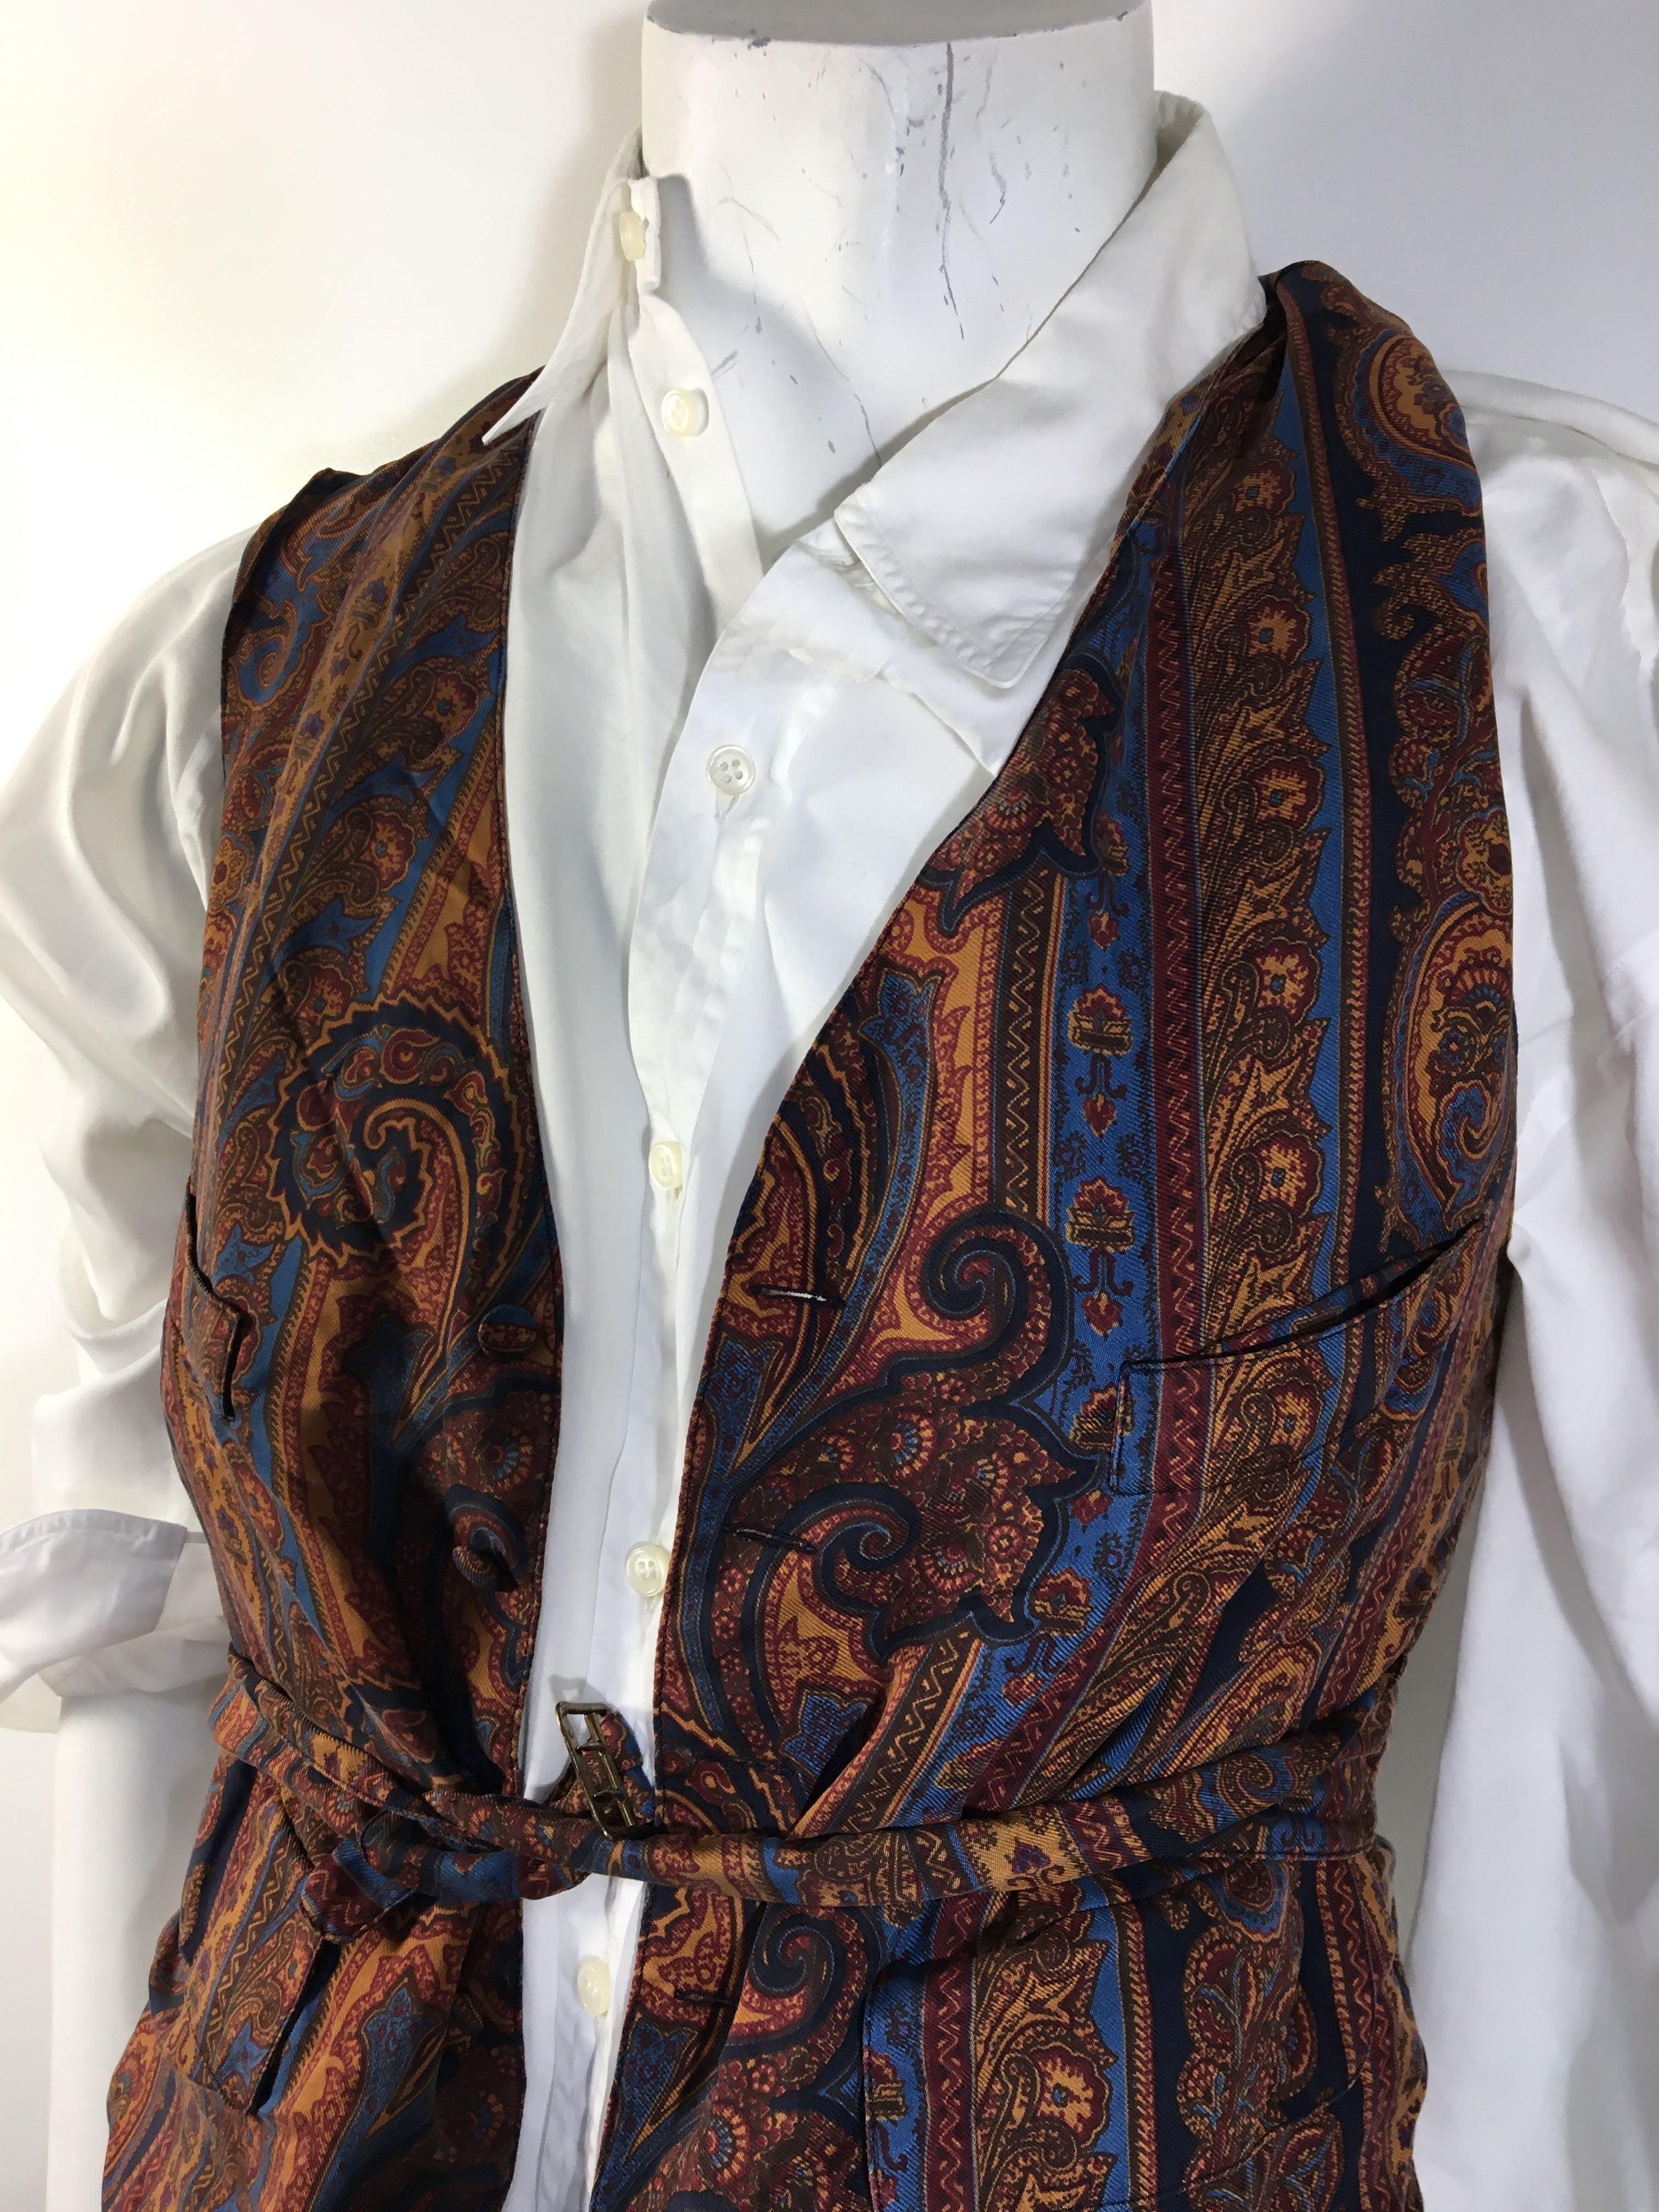 Mens Vintage Hermes Paris Exclusive
100% Silk Brown-Multi Paisley Print Vest
5 Button with Tie at Waist
Chest and Waist Pockets
Size 48
Made in France